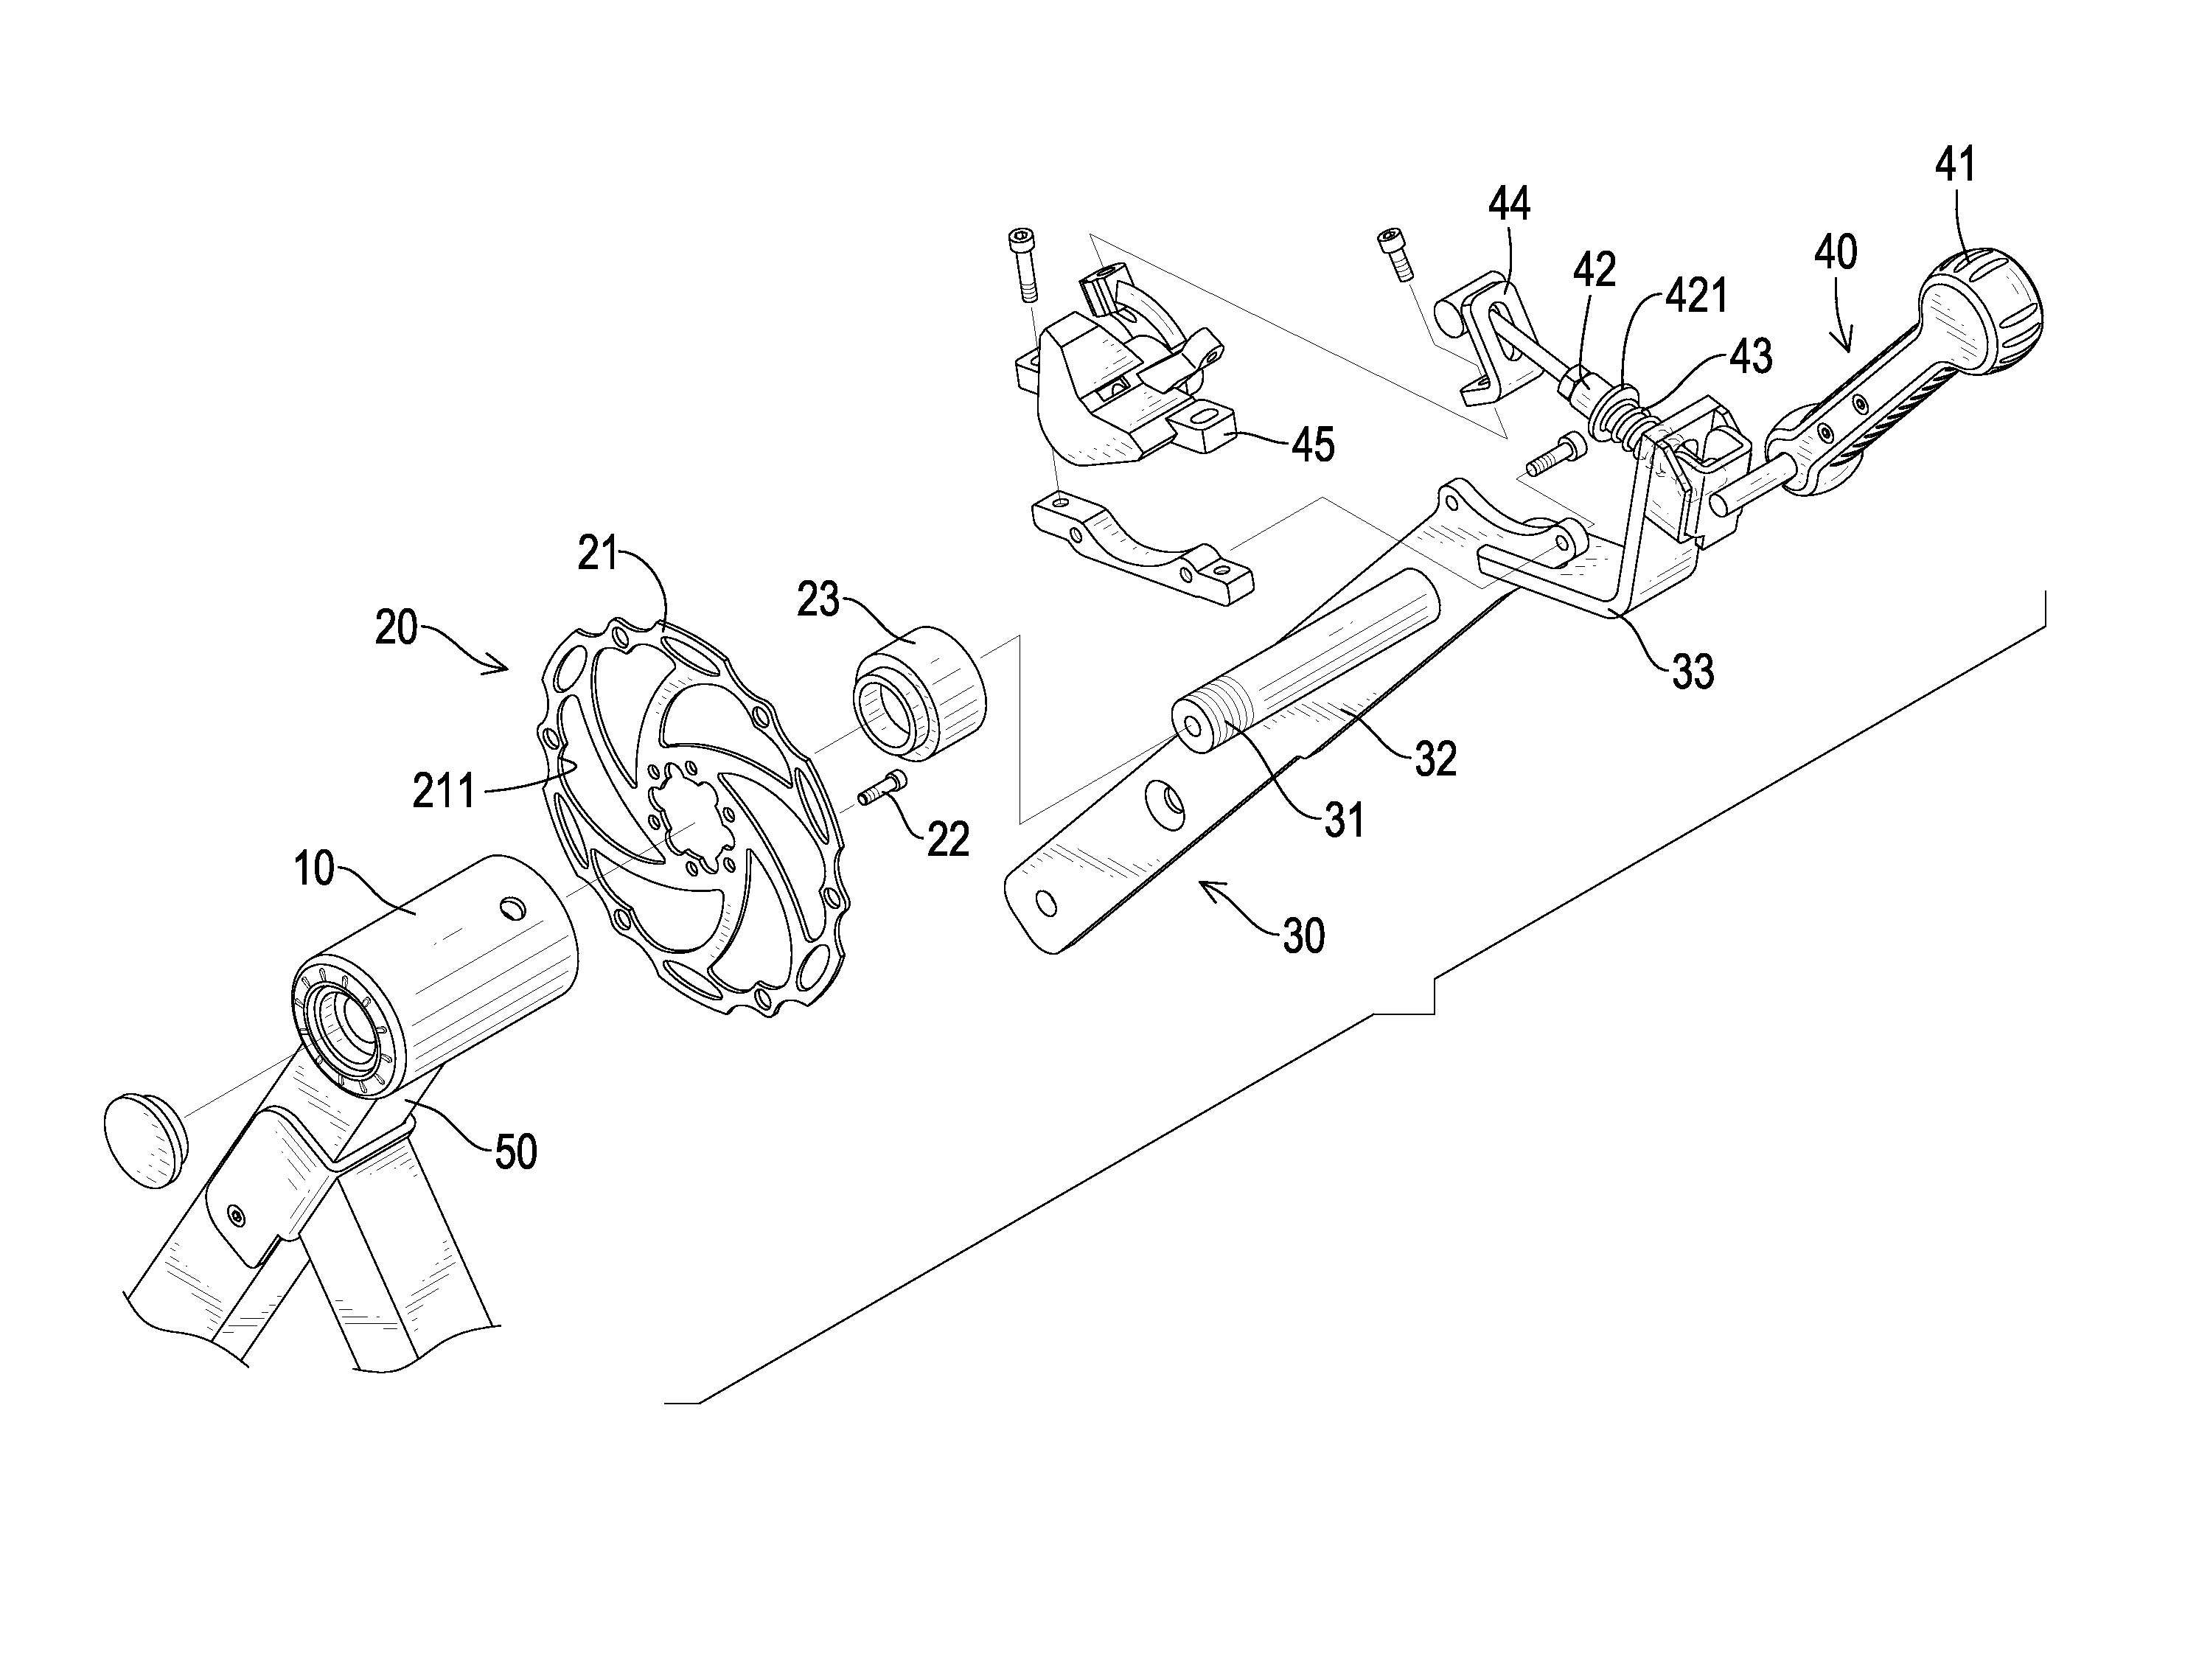 Disc brake device of an inversion table